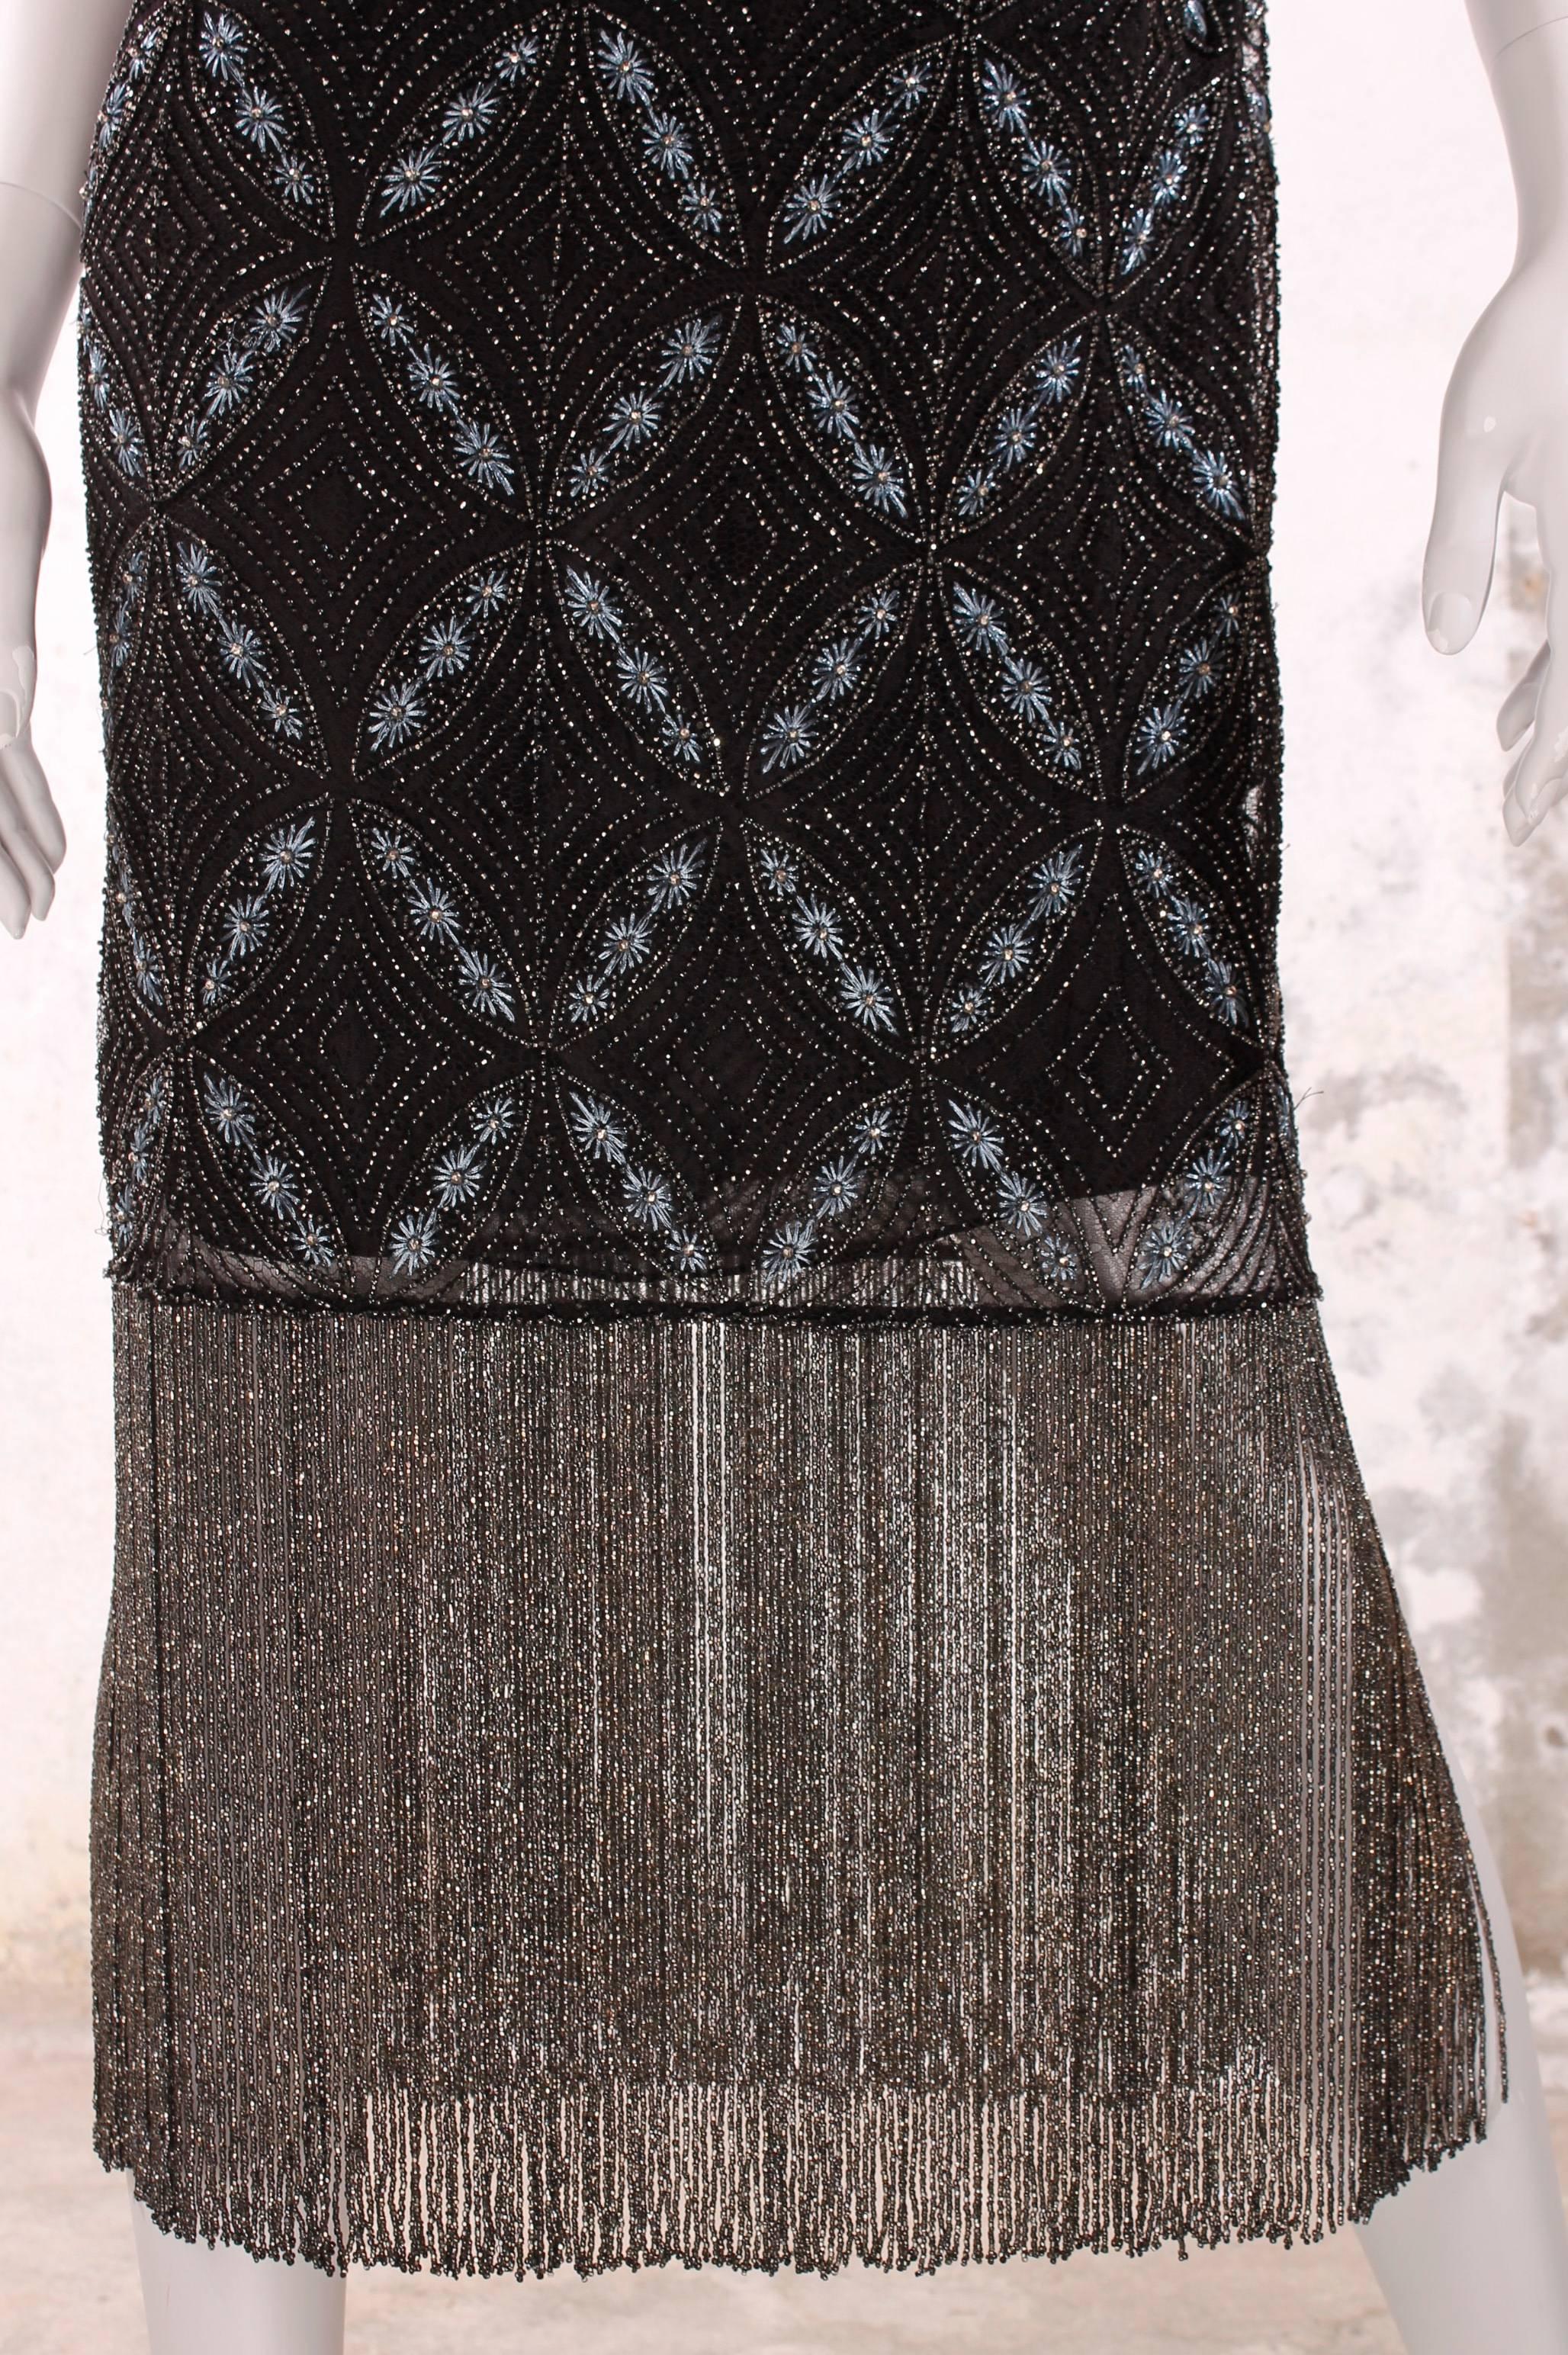 Christian Dior Evening Dress - black beads/embroidery In New Condition For Sale In Baarn, NL